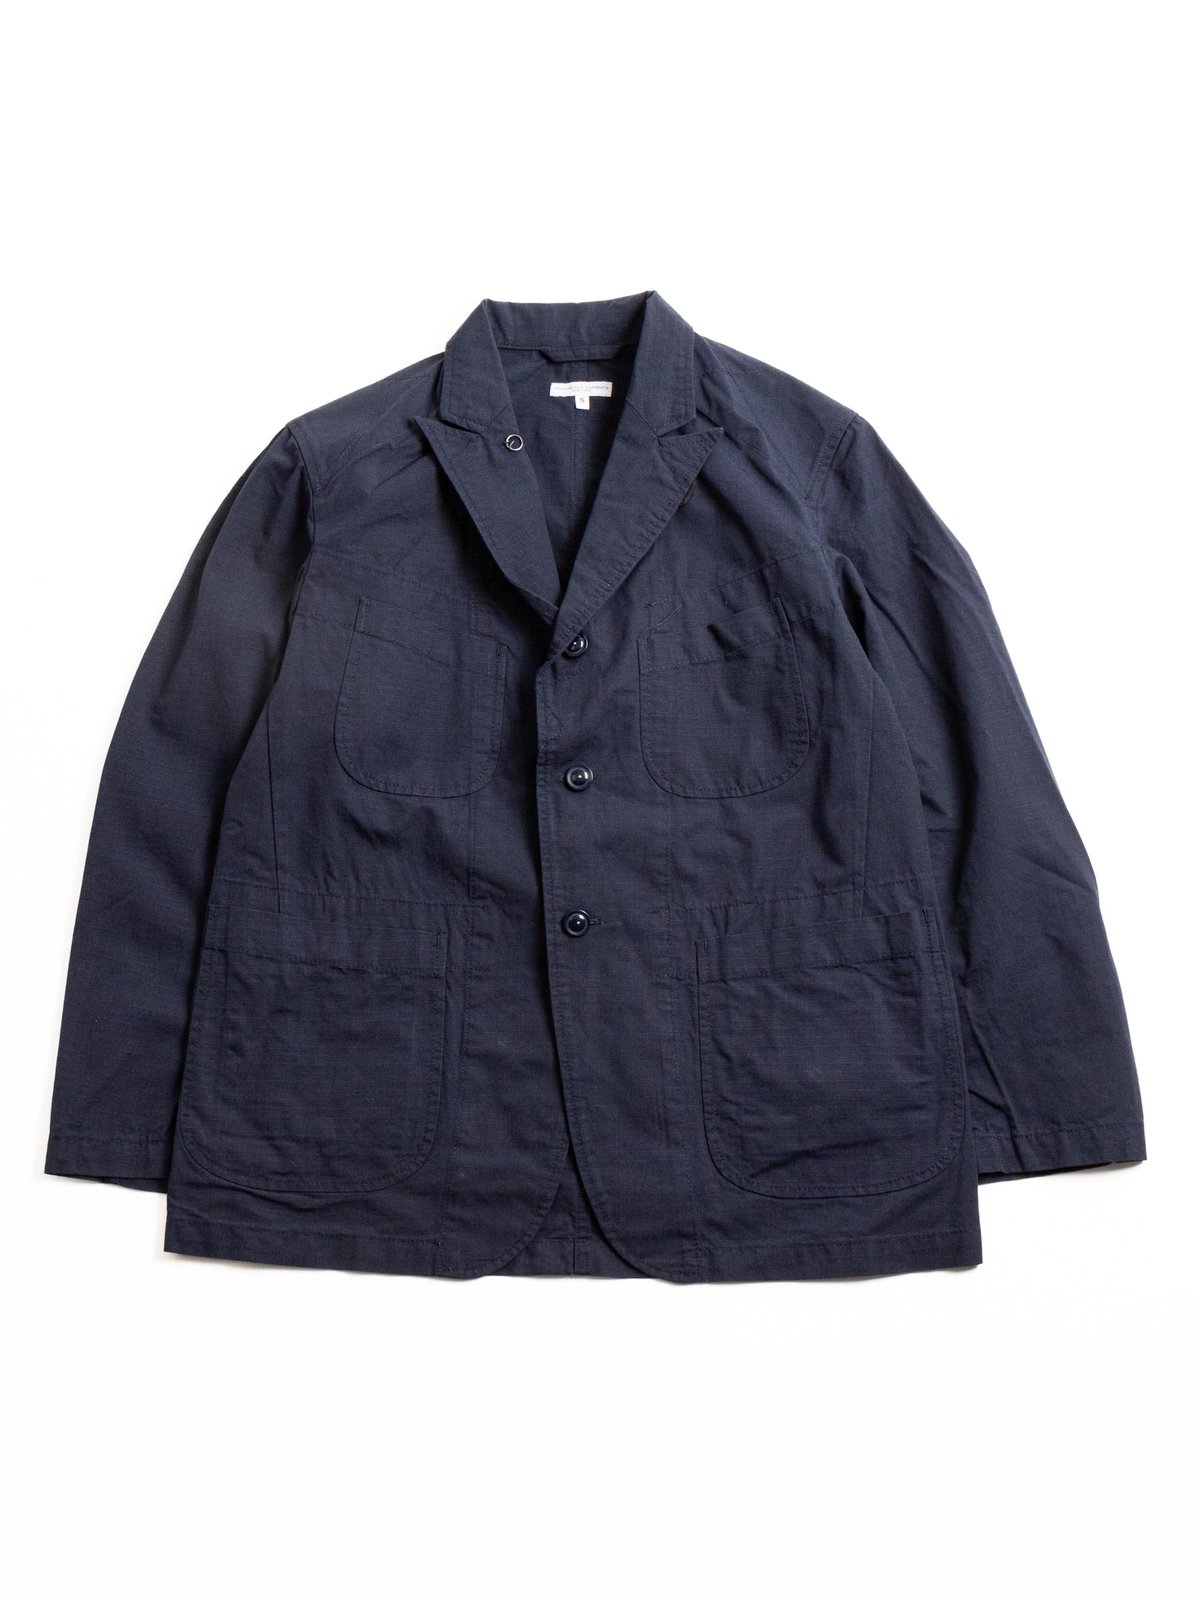 BEDFORD JACKET NAVY COTTON RIPSTOP - Image 1